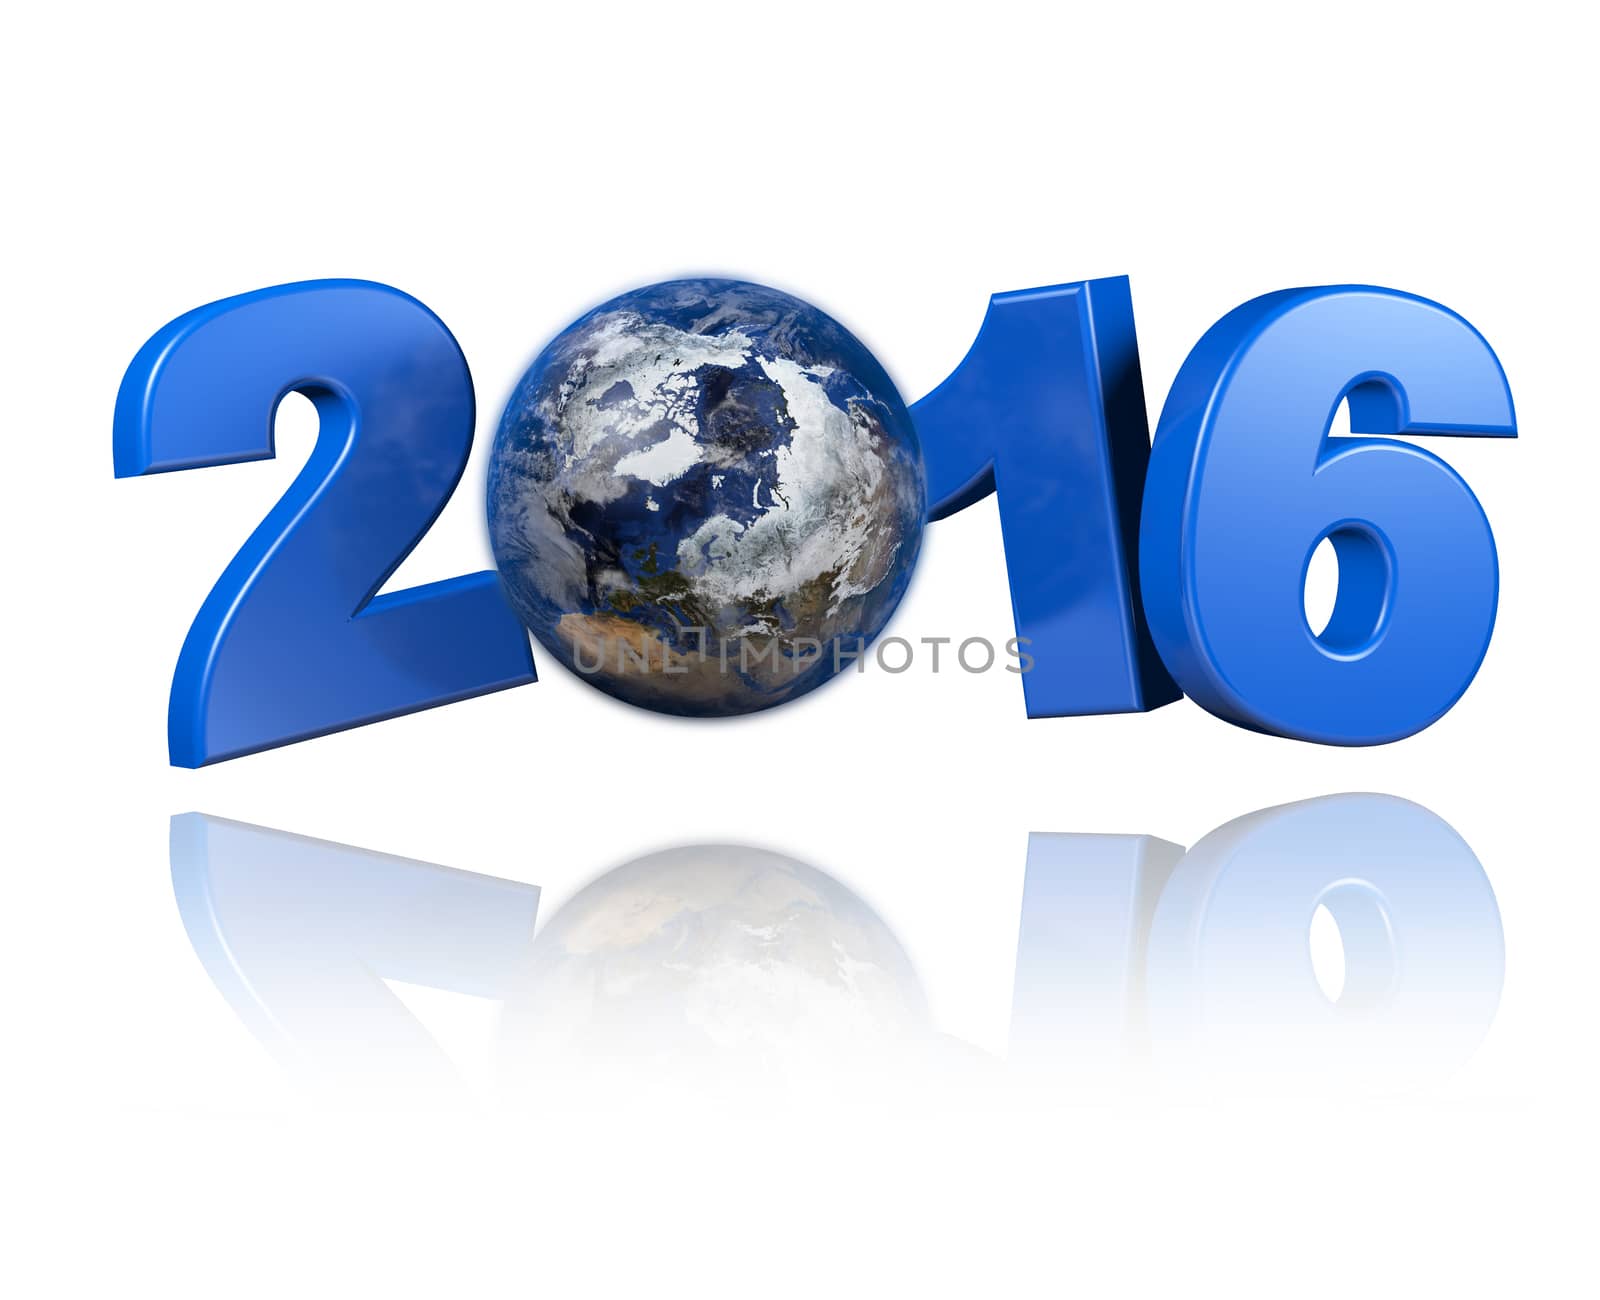 Arctic centered Earth view 2016 design with a white background